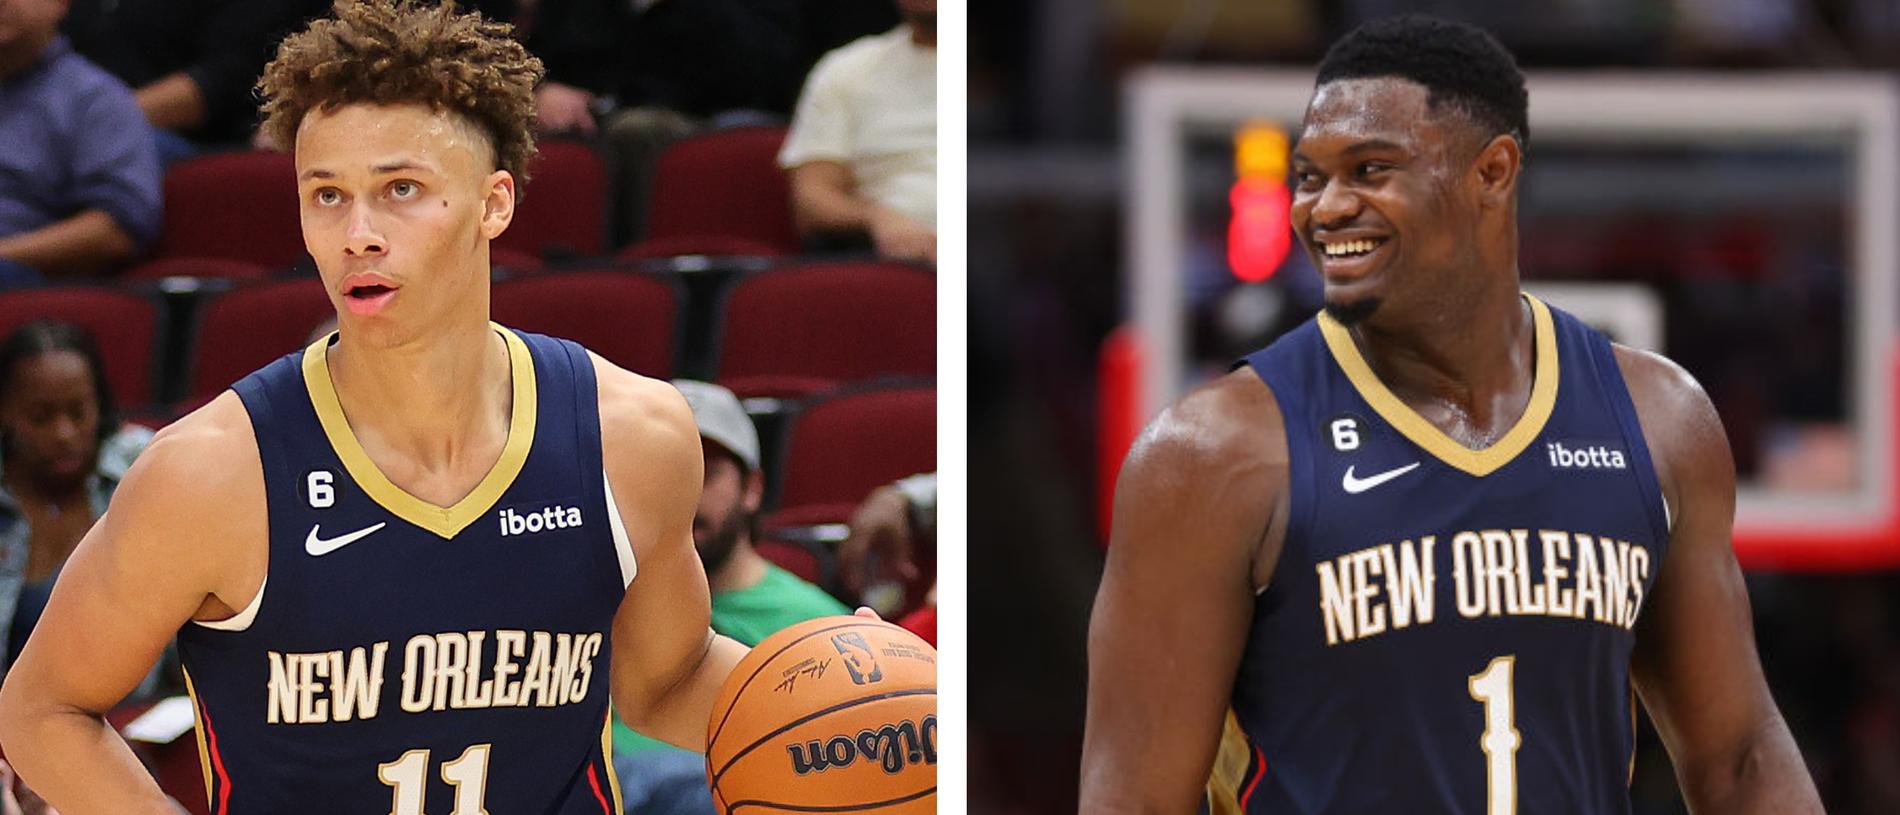 Pelicans: Dyson Daniels 'Aggressive' 4th Quarter, Proved He Can Compete in  the NBA - Sports Illustrated New Orleans Pelicans News, Analysis, and More